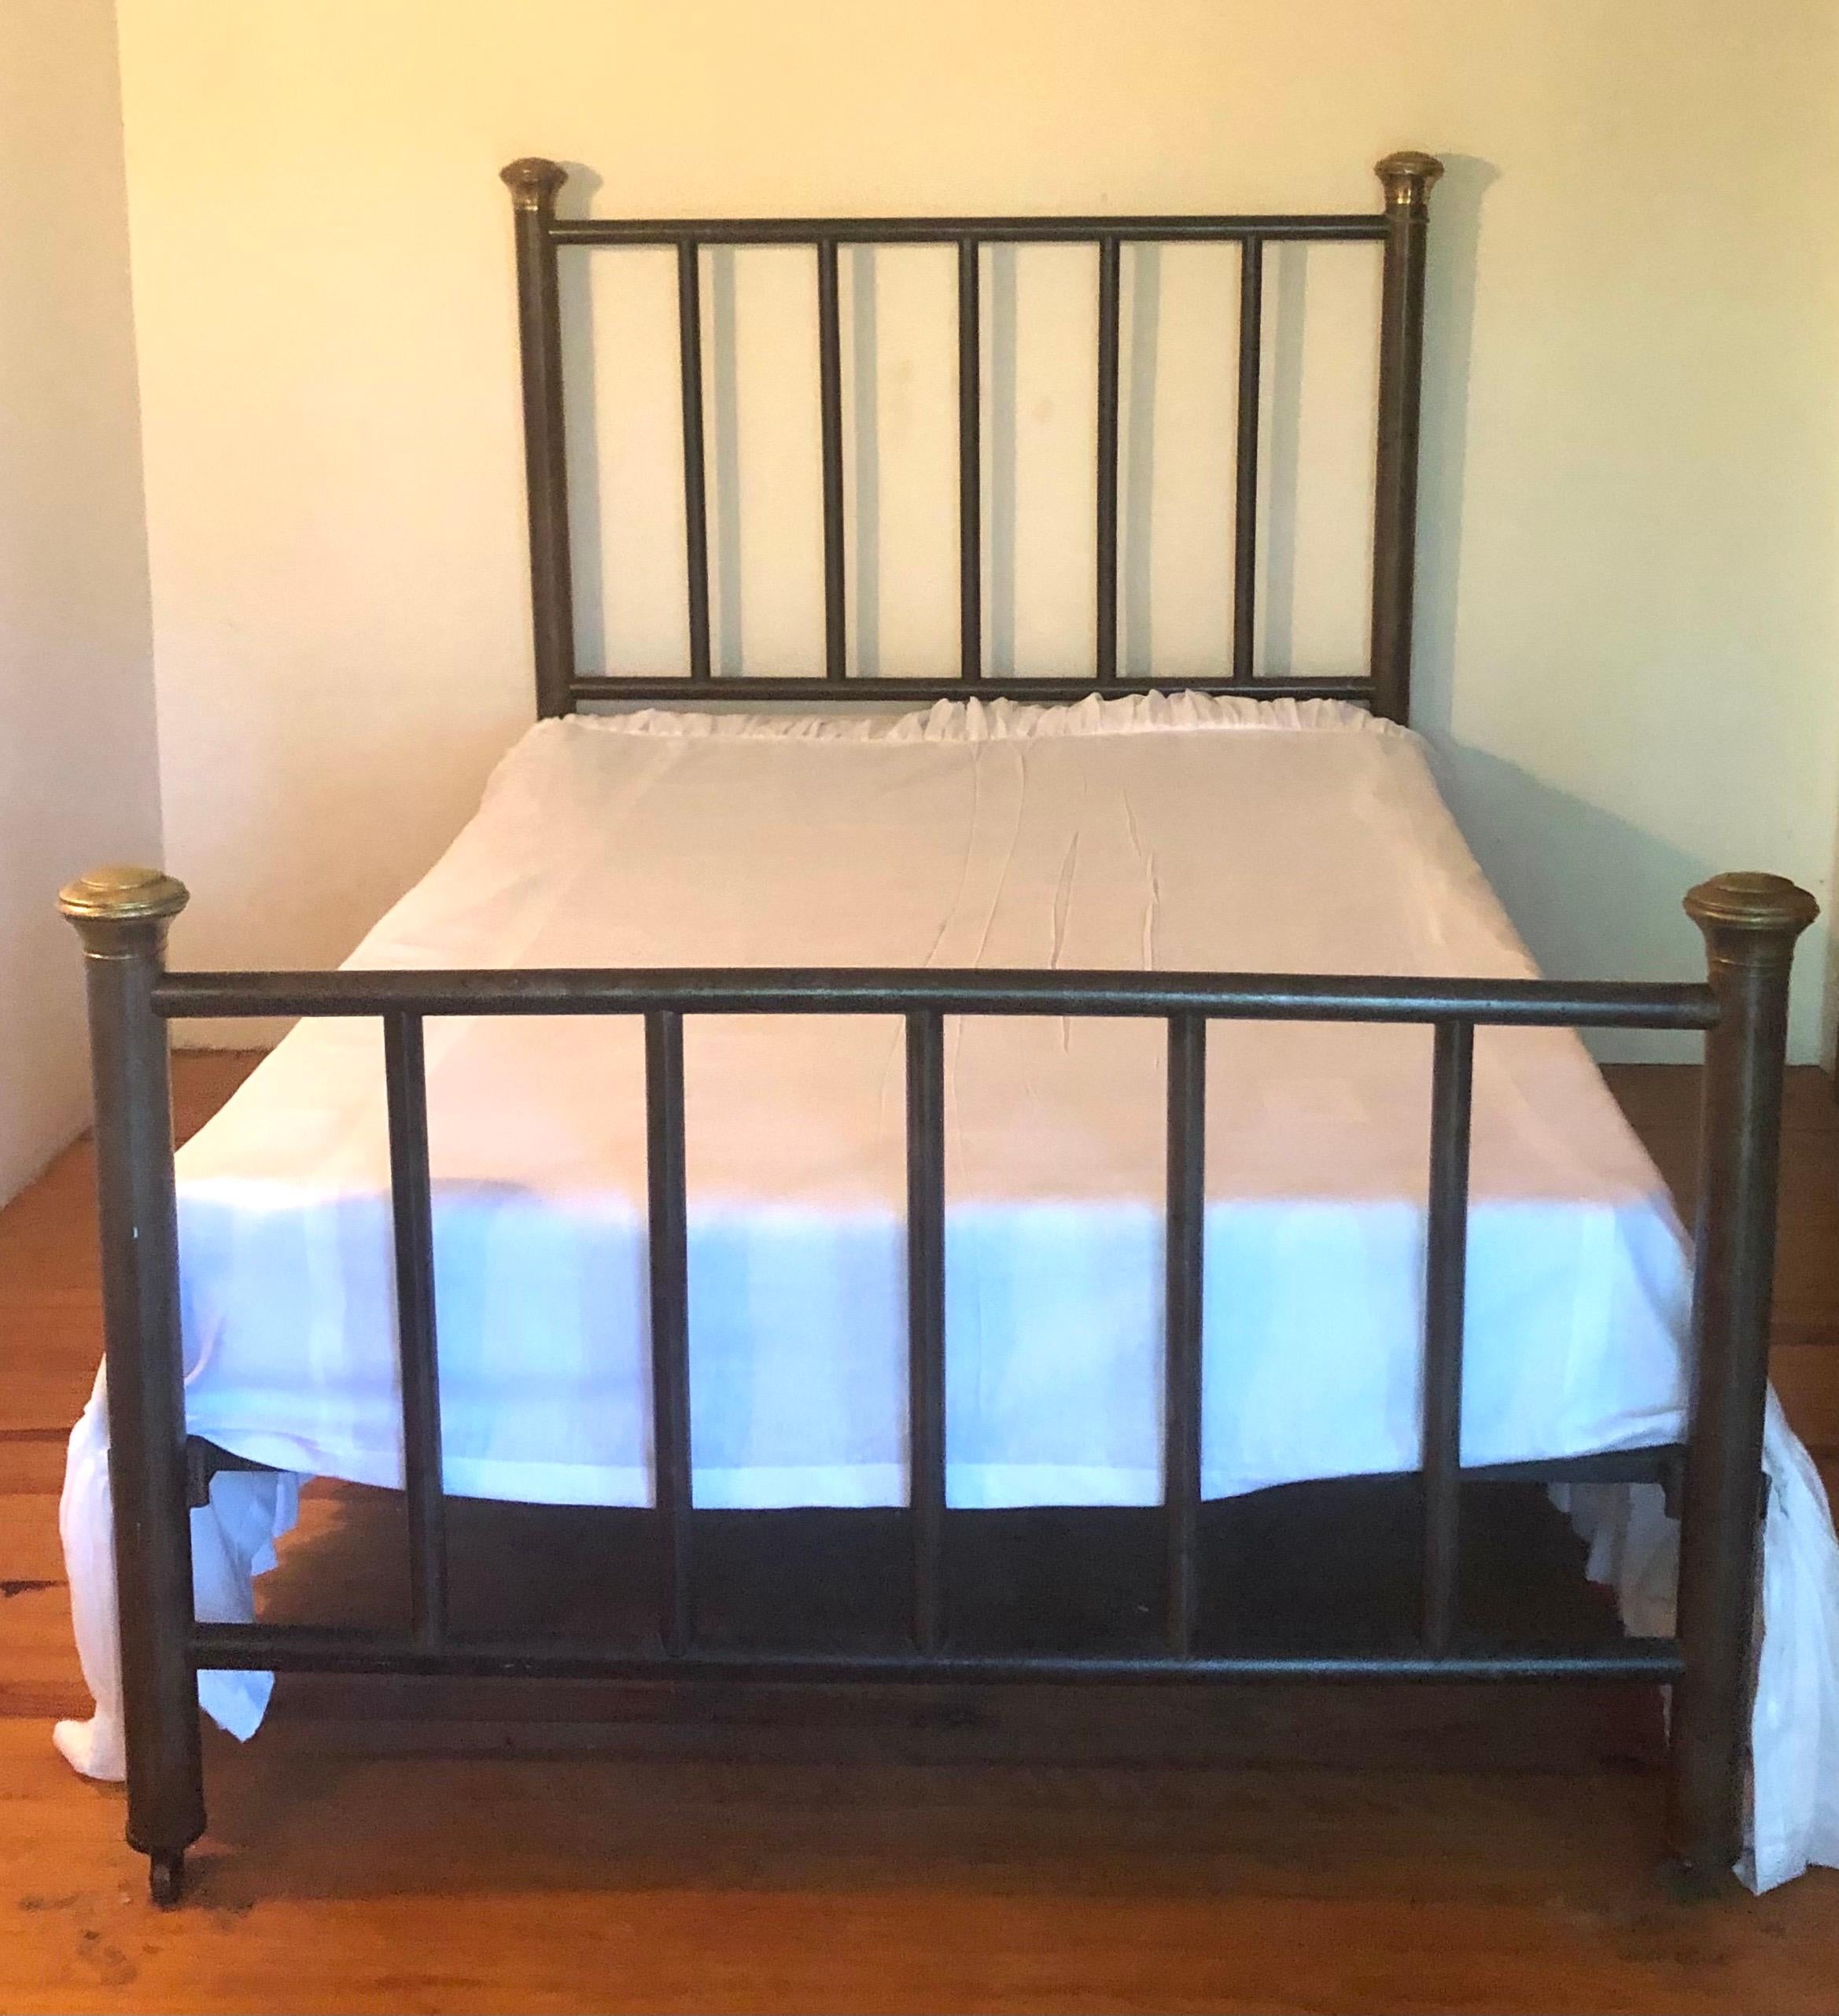 A French modern neoclassical bronzed iron and brass full bed, circa 1930. Tasteful, strong and in very good working condition, it has a bronzed iron frame with brass capitals on each bedpost. 

The dimensions of the frame are H 58.5 (36 footboard